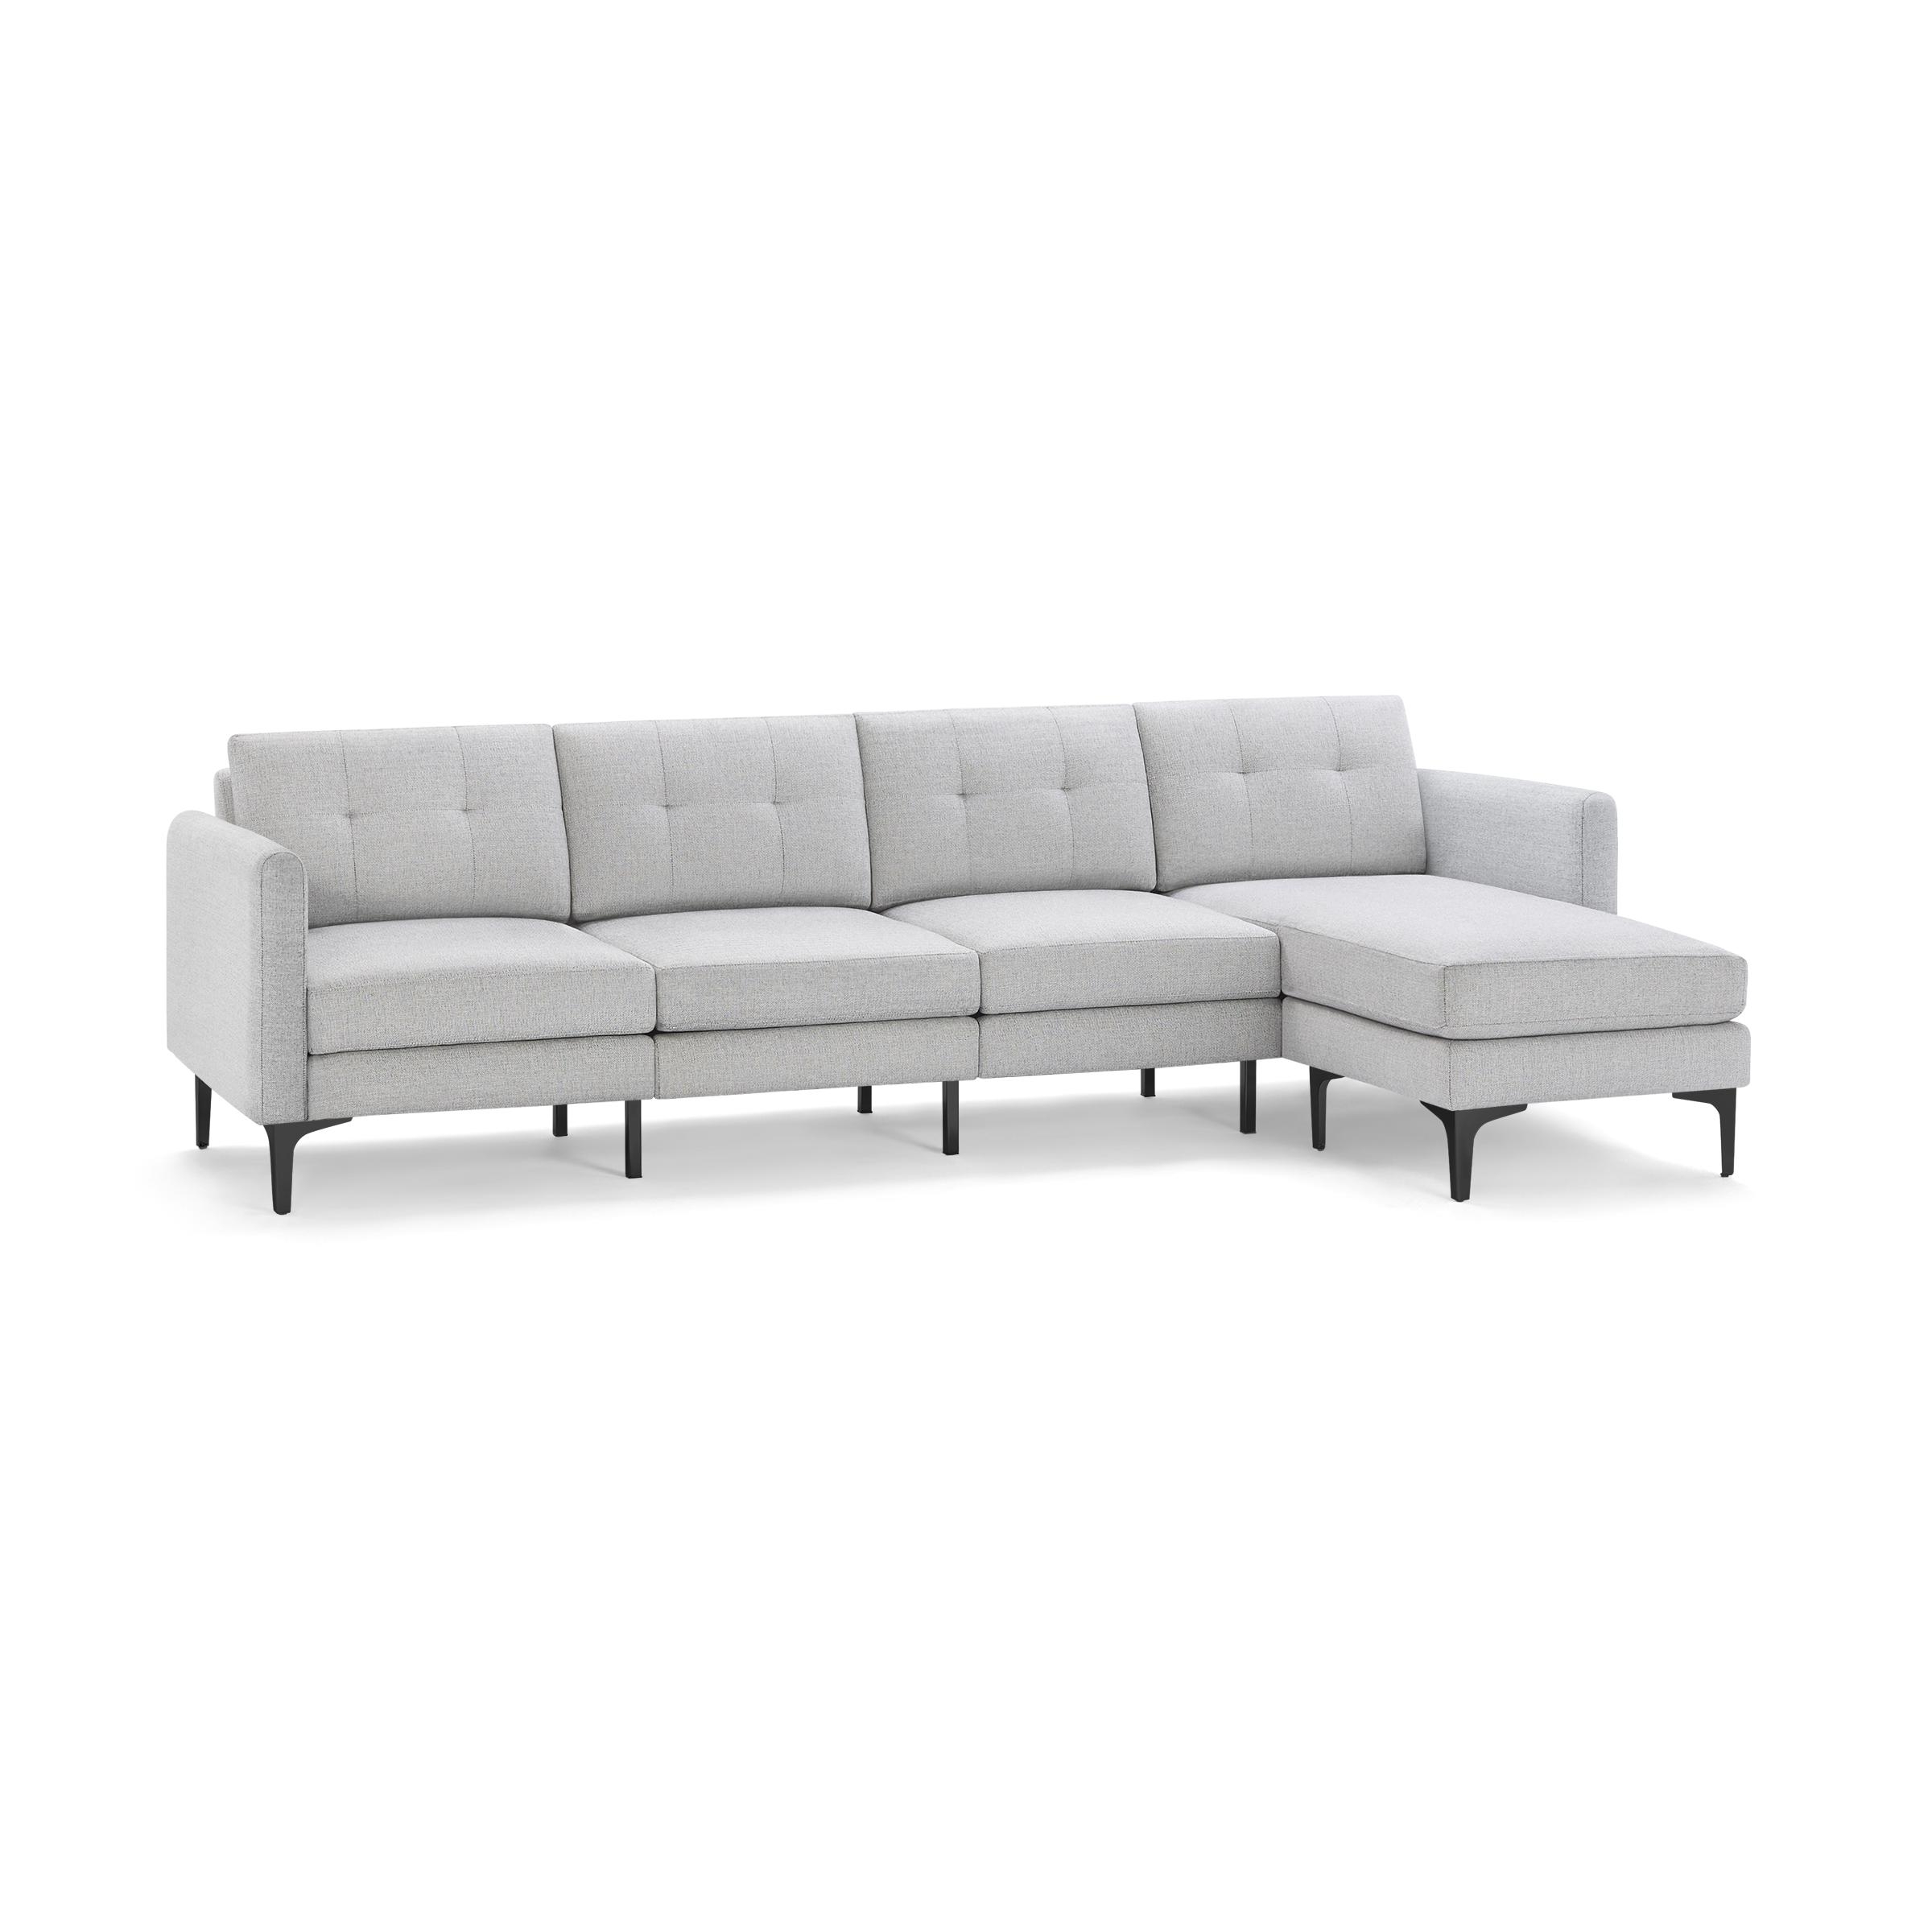 The Arch Nomad King Sectional Sofa in Crushed Gravel - Image 0